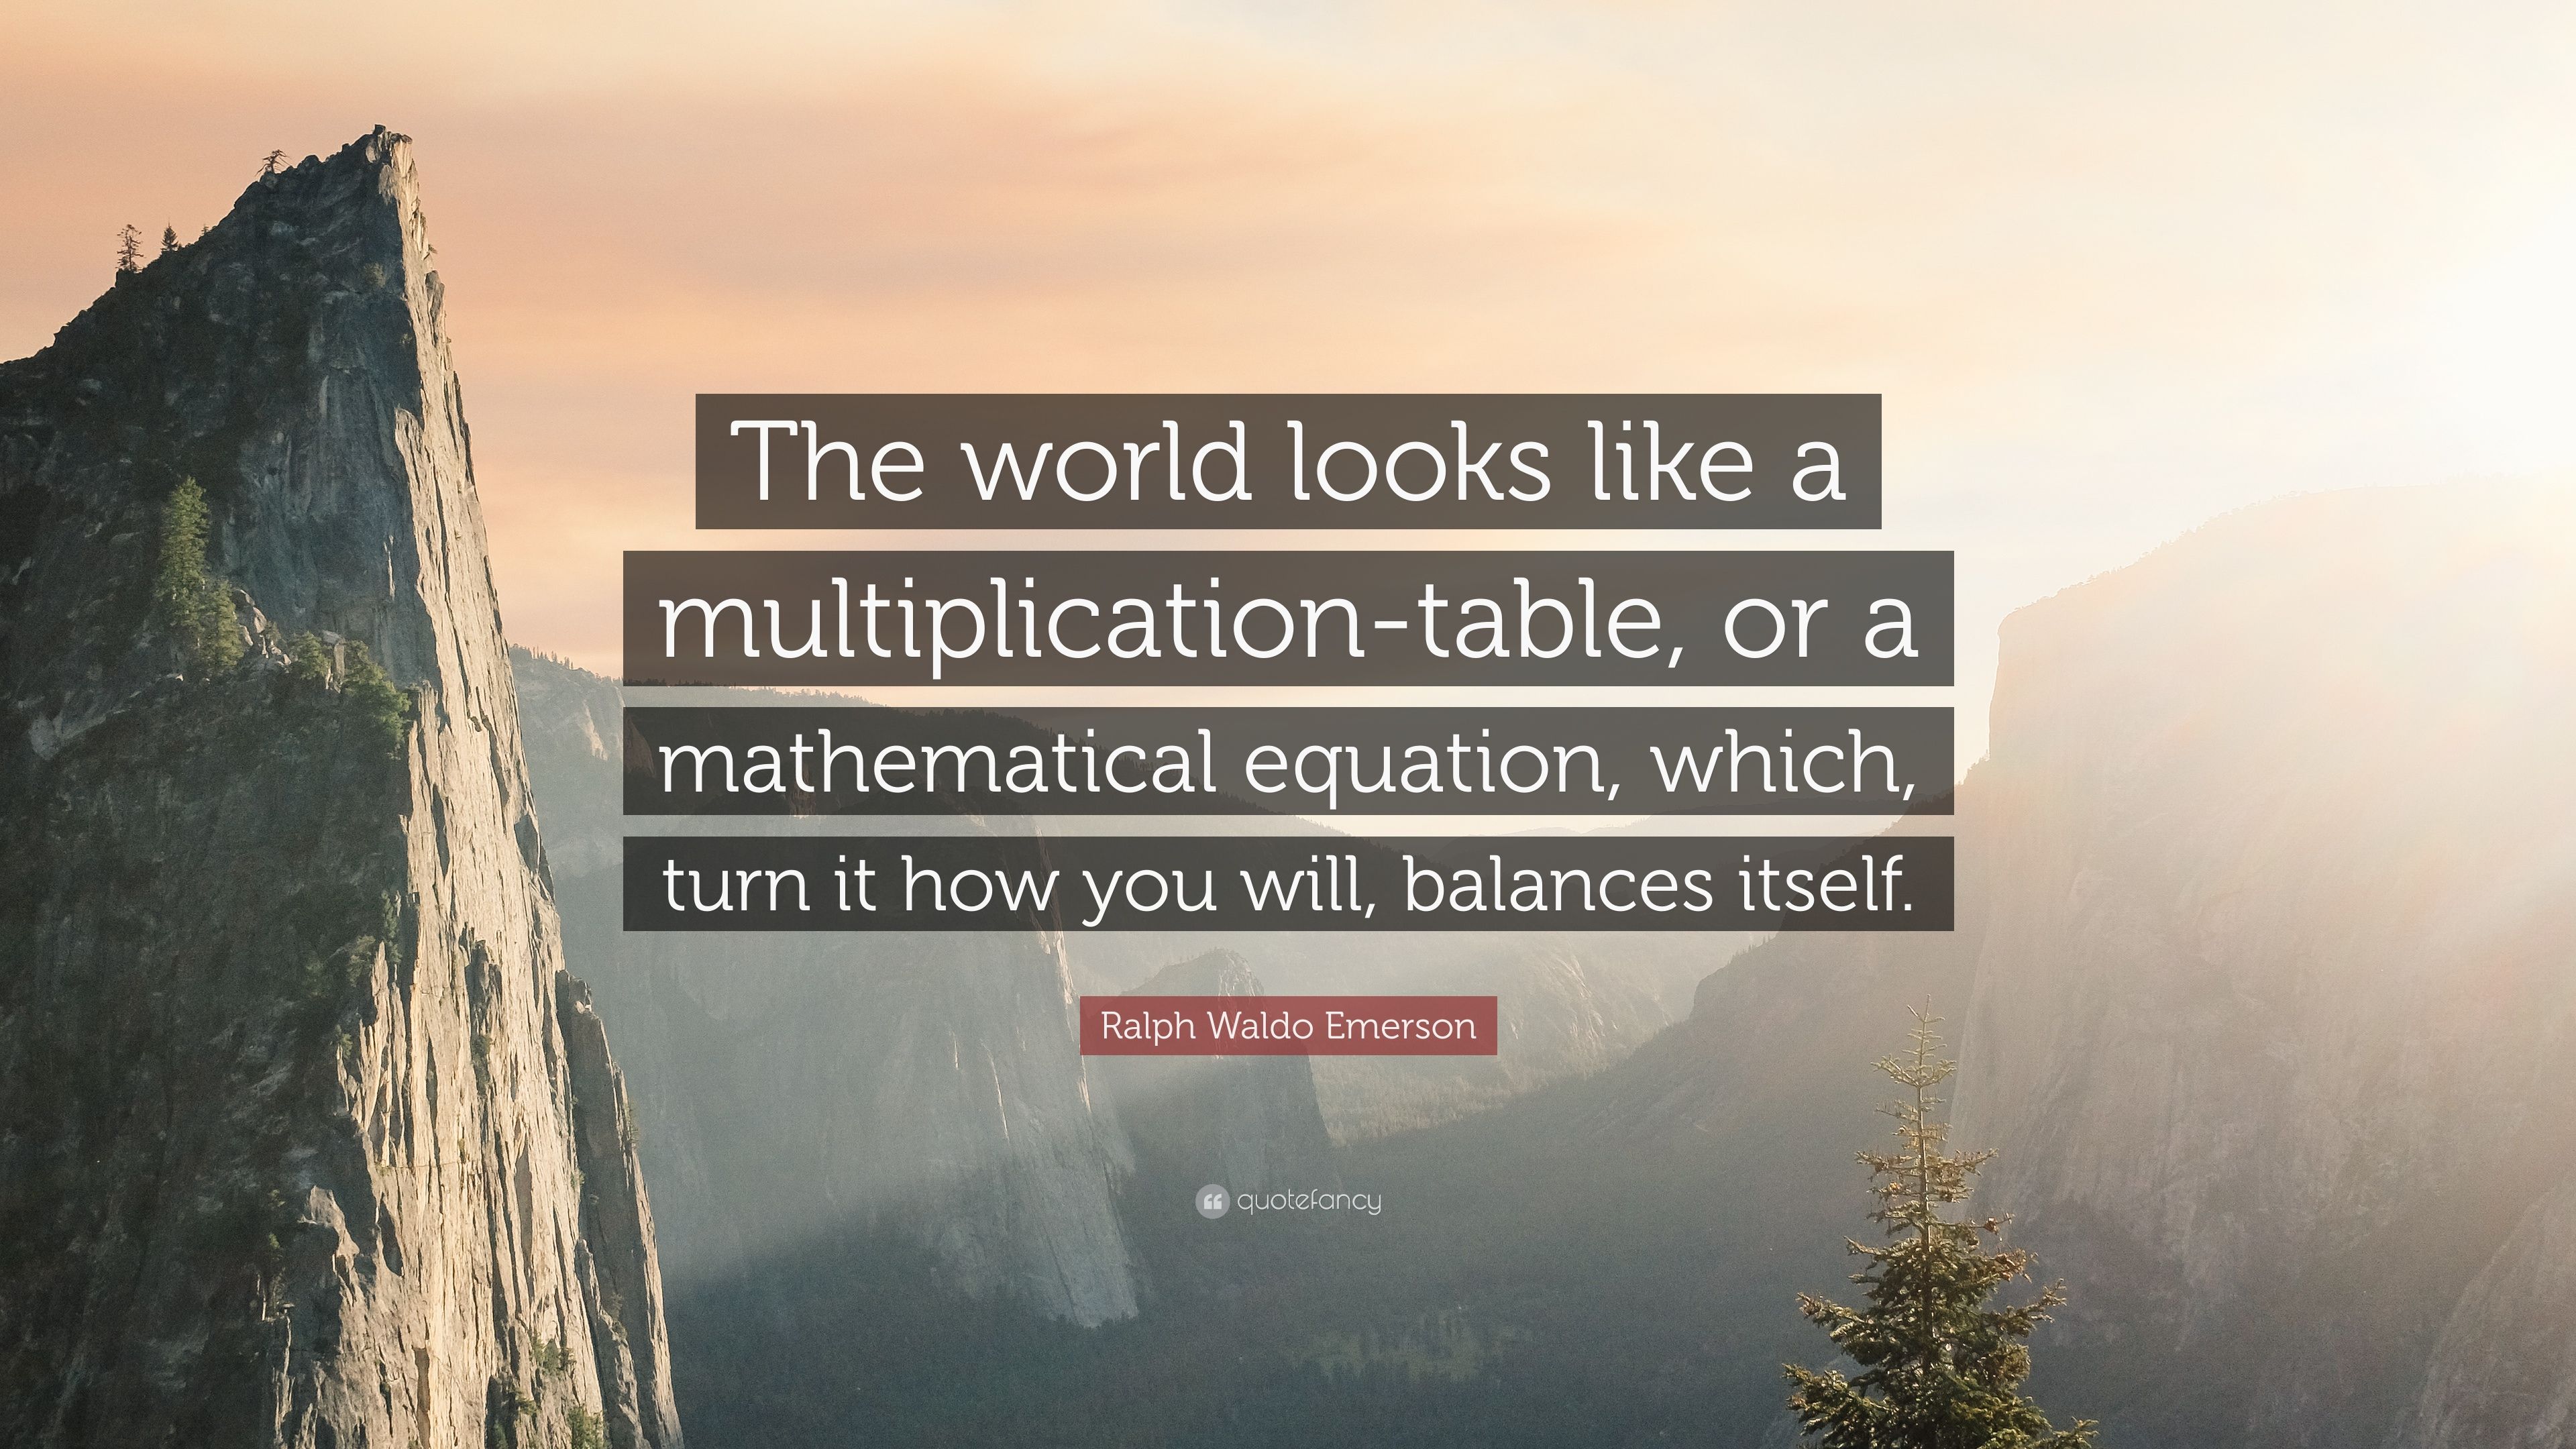 Ralph Waldo Emerson Quote: “The World Looks Like A Multiplication Table, Or A Mathematical Equation, Which, Turn It How You Will, Balances Itself.” (12 Wallpaper)